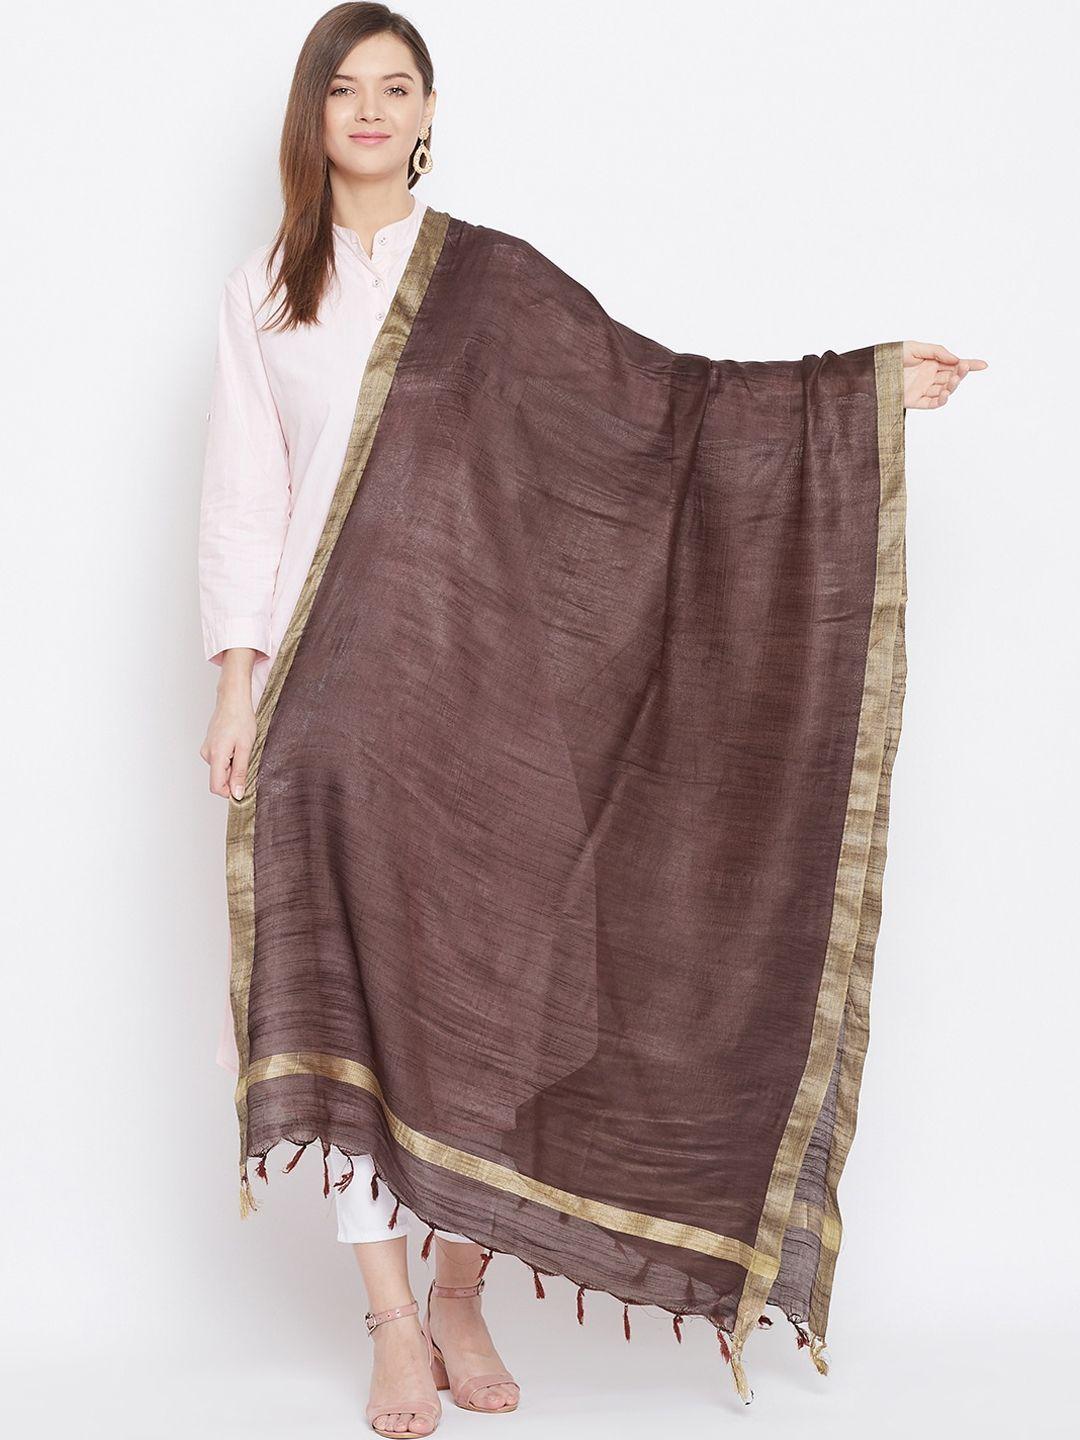 clora creation coffee brown & gold-toned solid dupatta